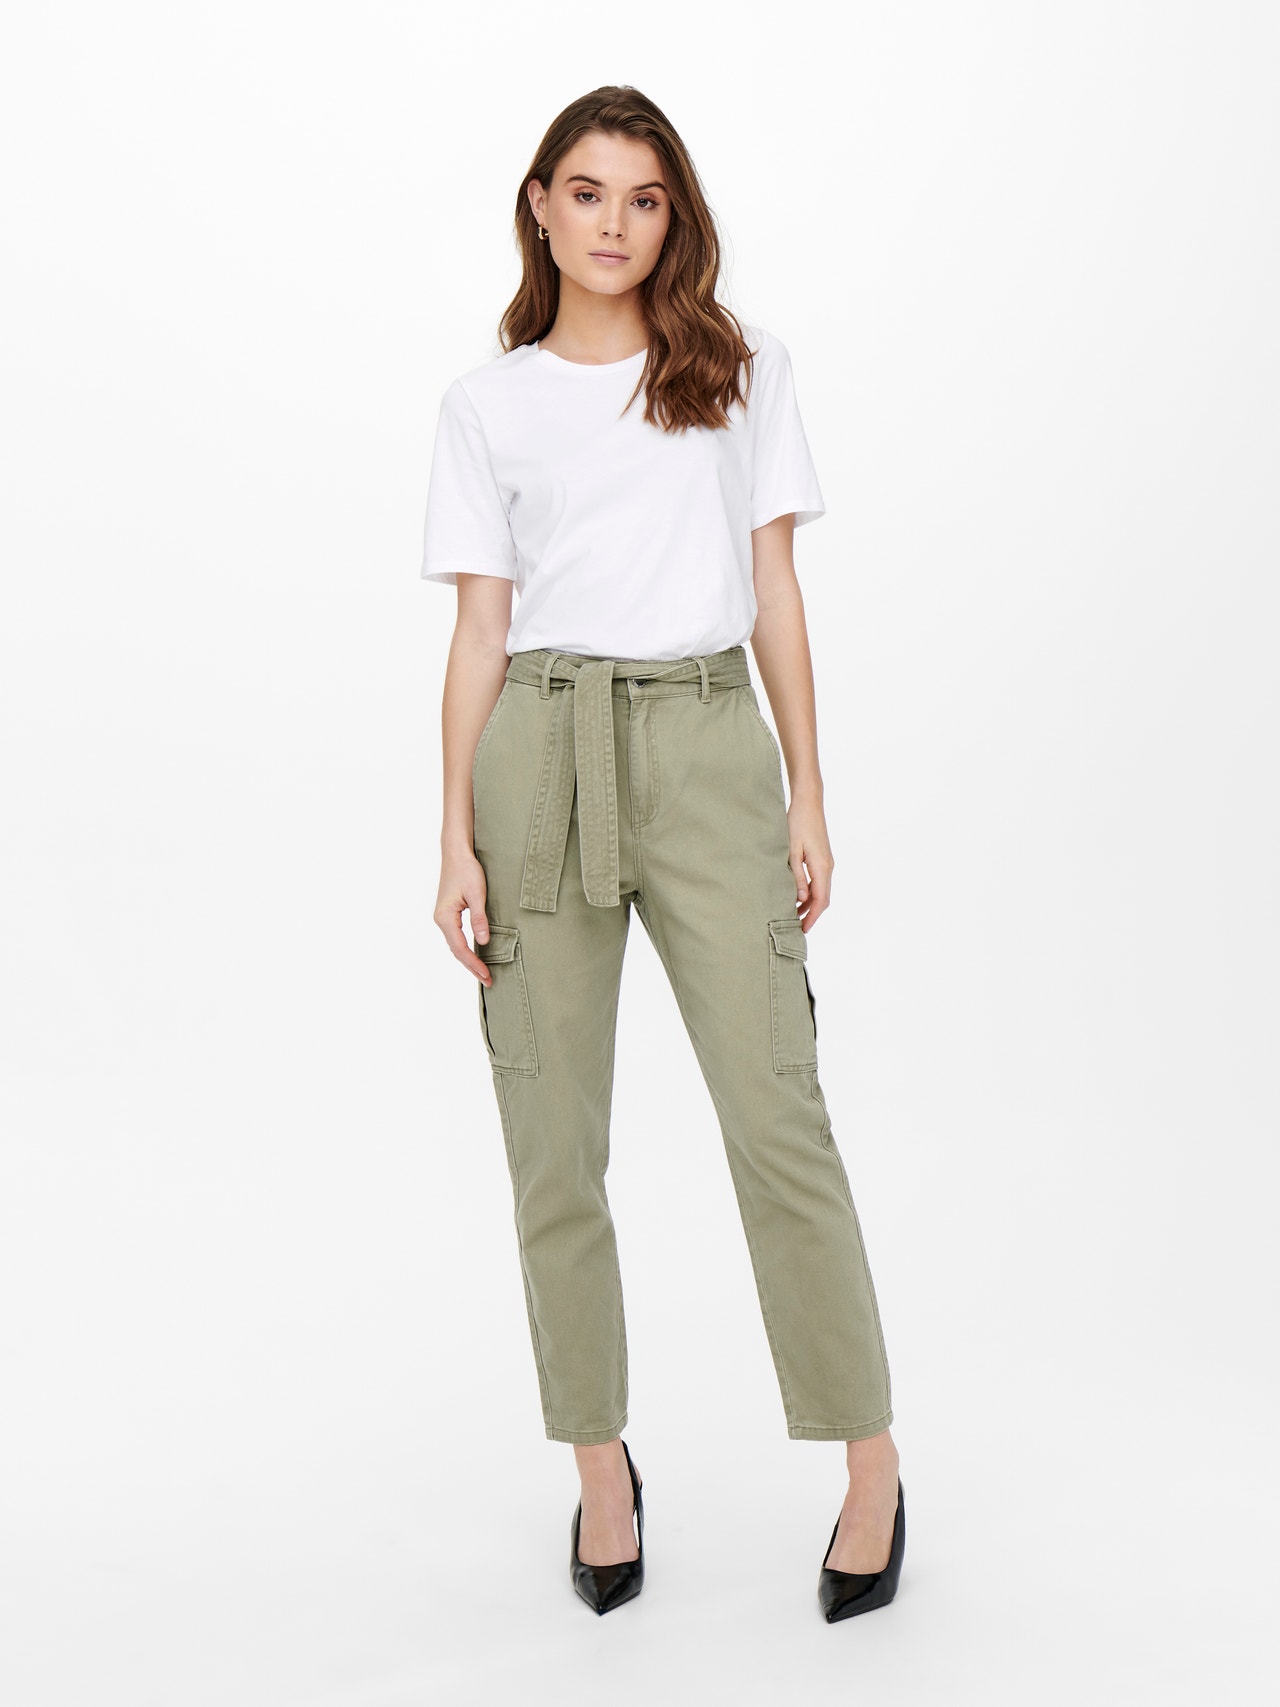 ONLY Cargo Fit High waist Trousers -Mermaid - 15249397